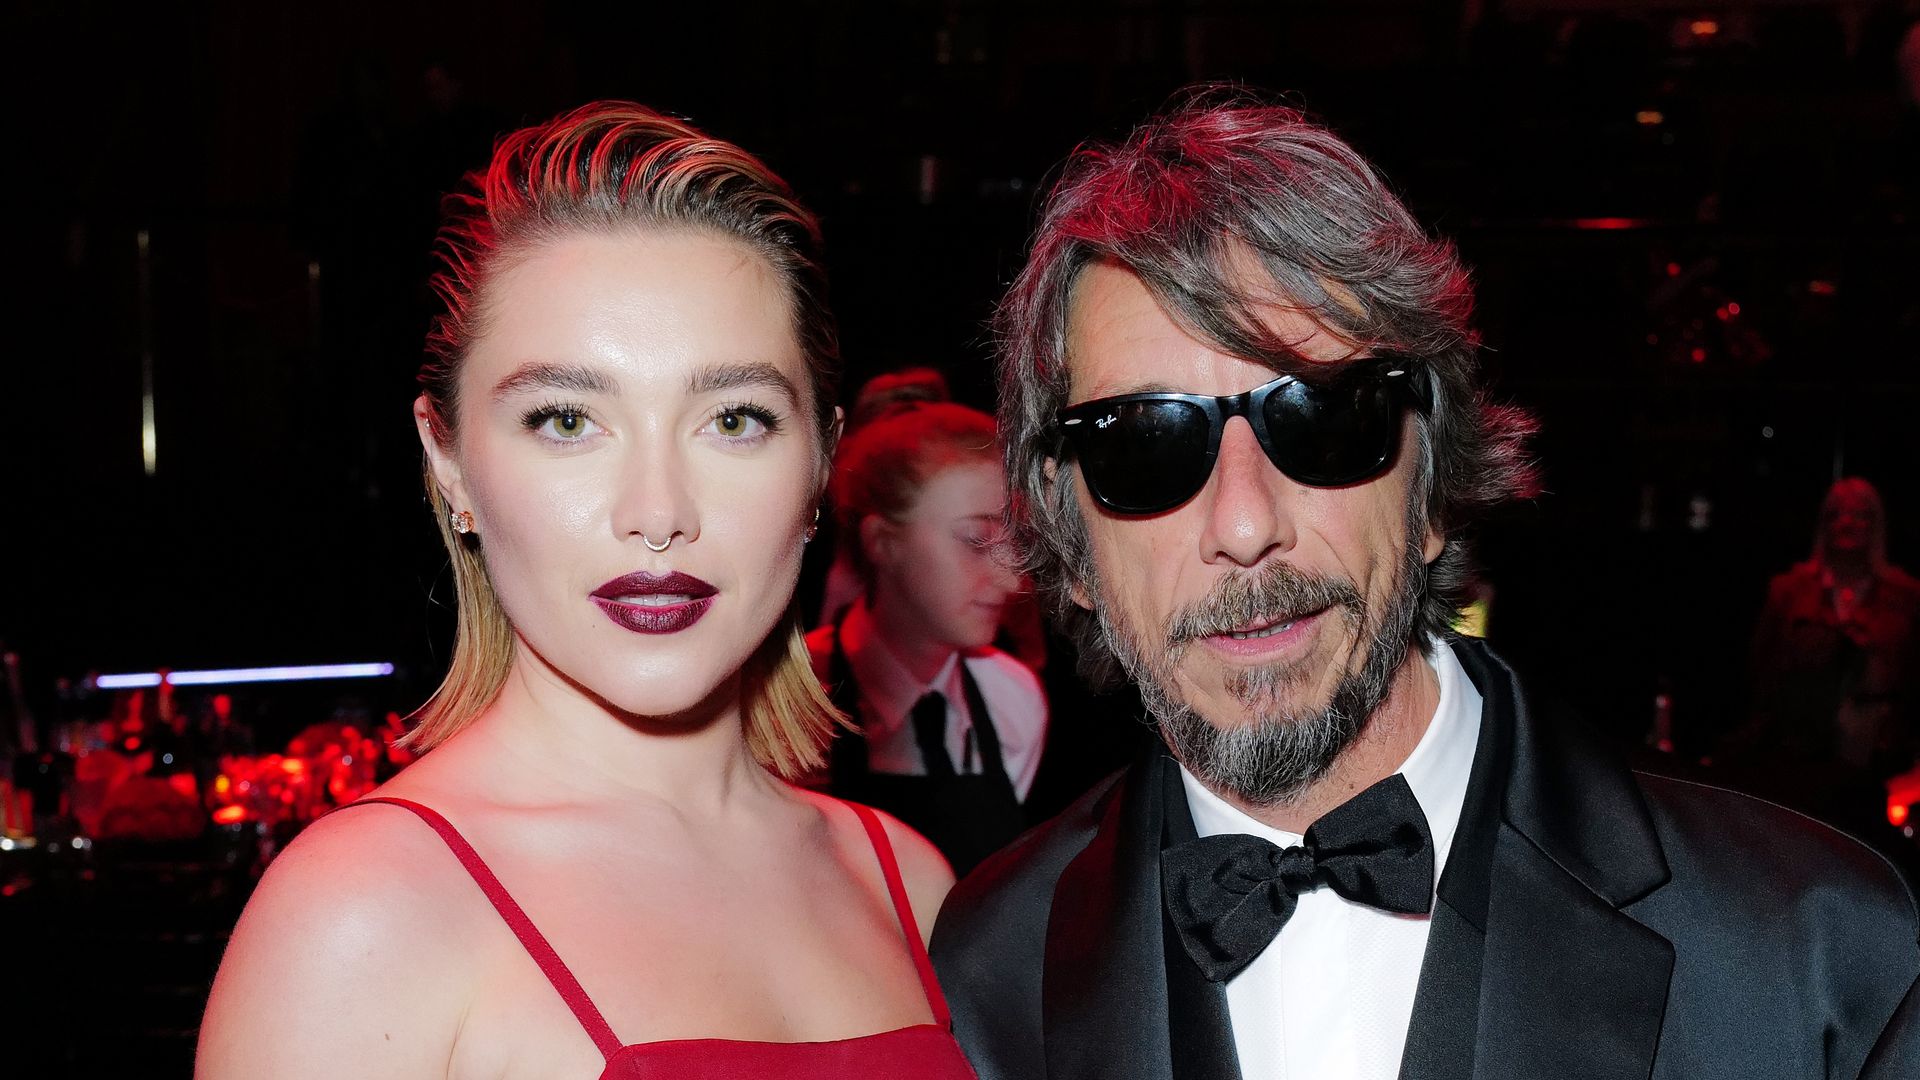  Florence Pugh and Pierpaolo Piccioli attend The Fashion Awards 2022 pre-ceremony drinks at the Royal Albert Hall on December 05, 2022 in London, England. (Photo by Darren Gerrish/Getty Images for BFC)